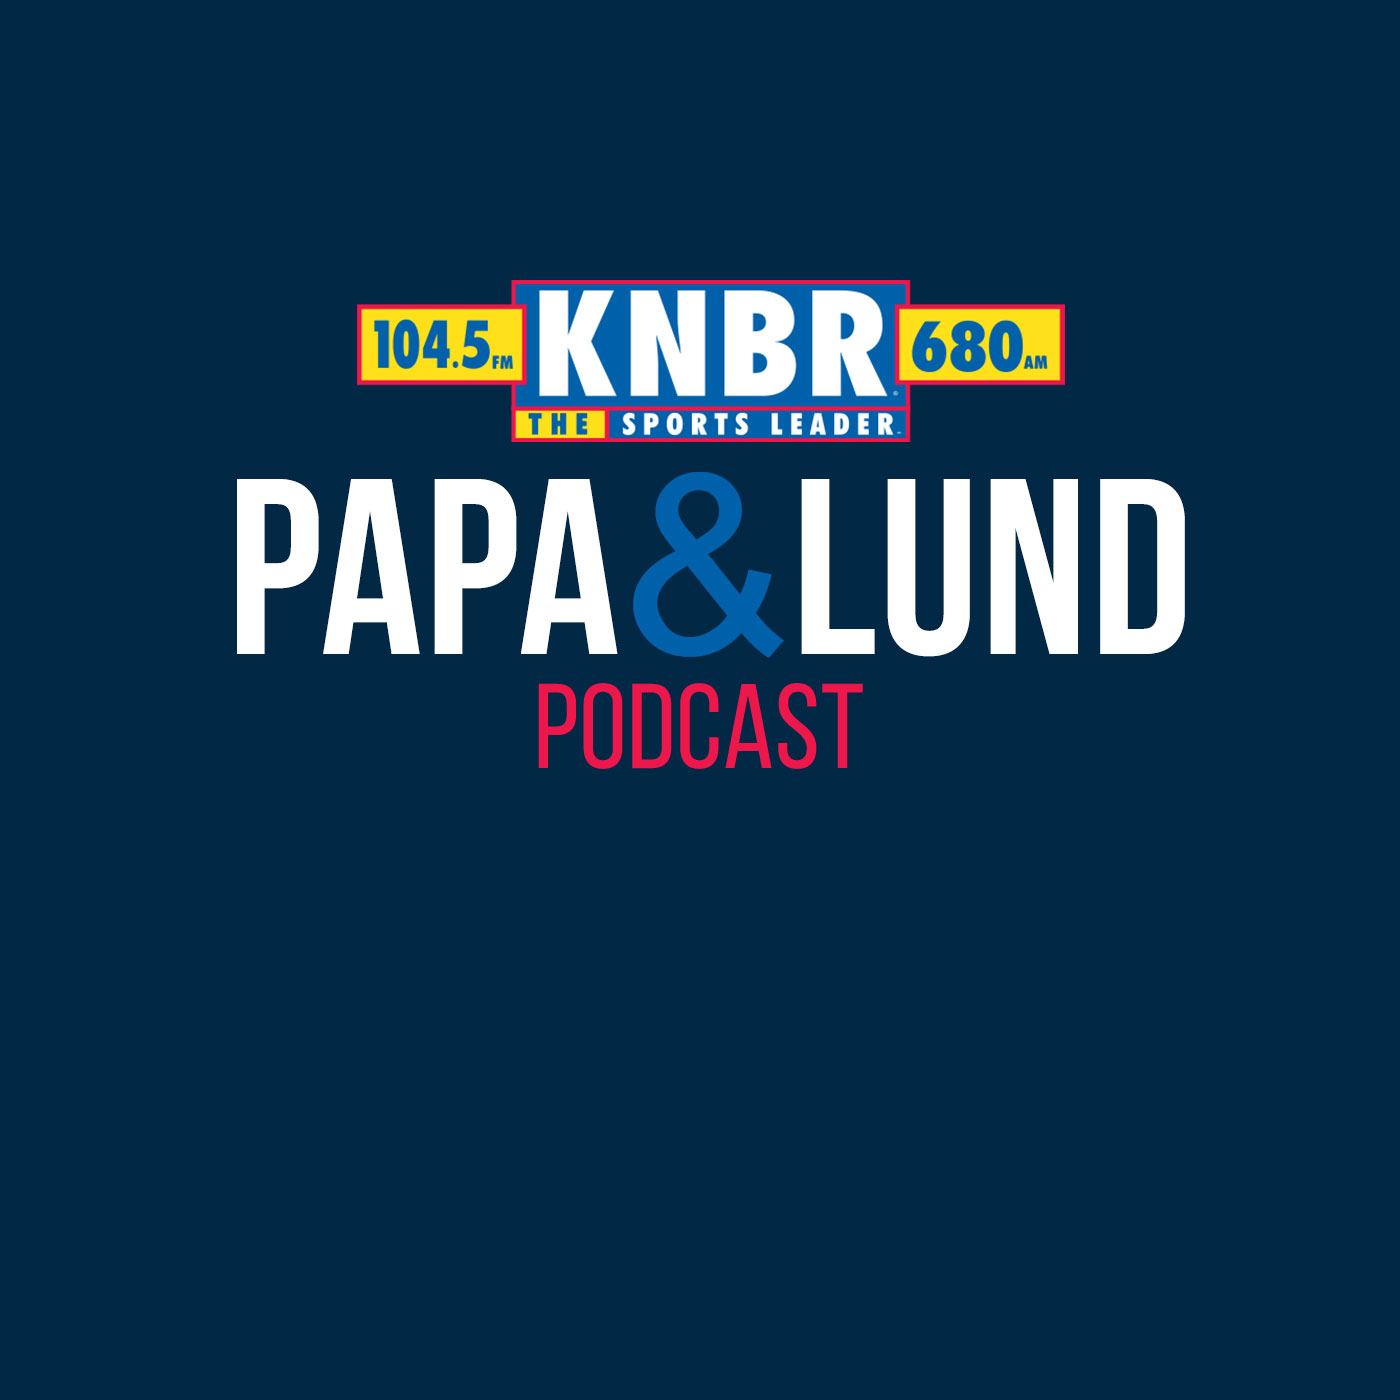 2-7 Will Gavin joins Papa & Lund LIVE from Media Row to discuss the 49ers successful season and look ahead to a full year dose of CMC and how the 49ers offense can evolve